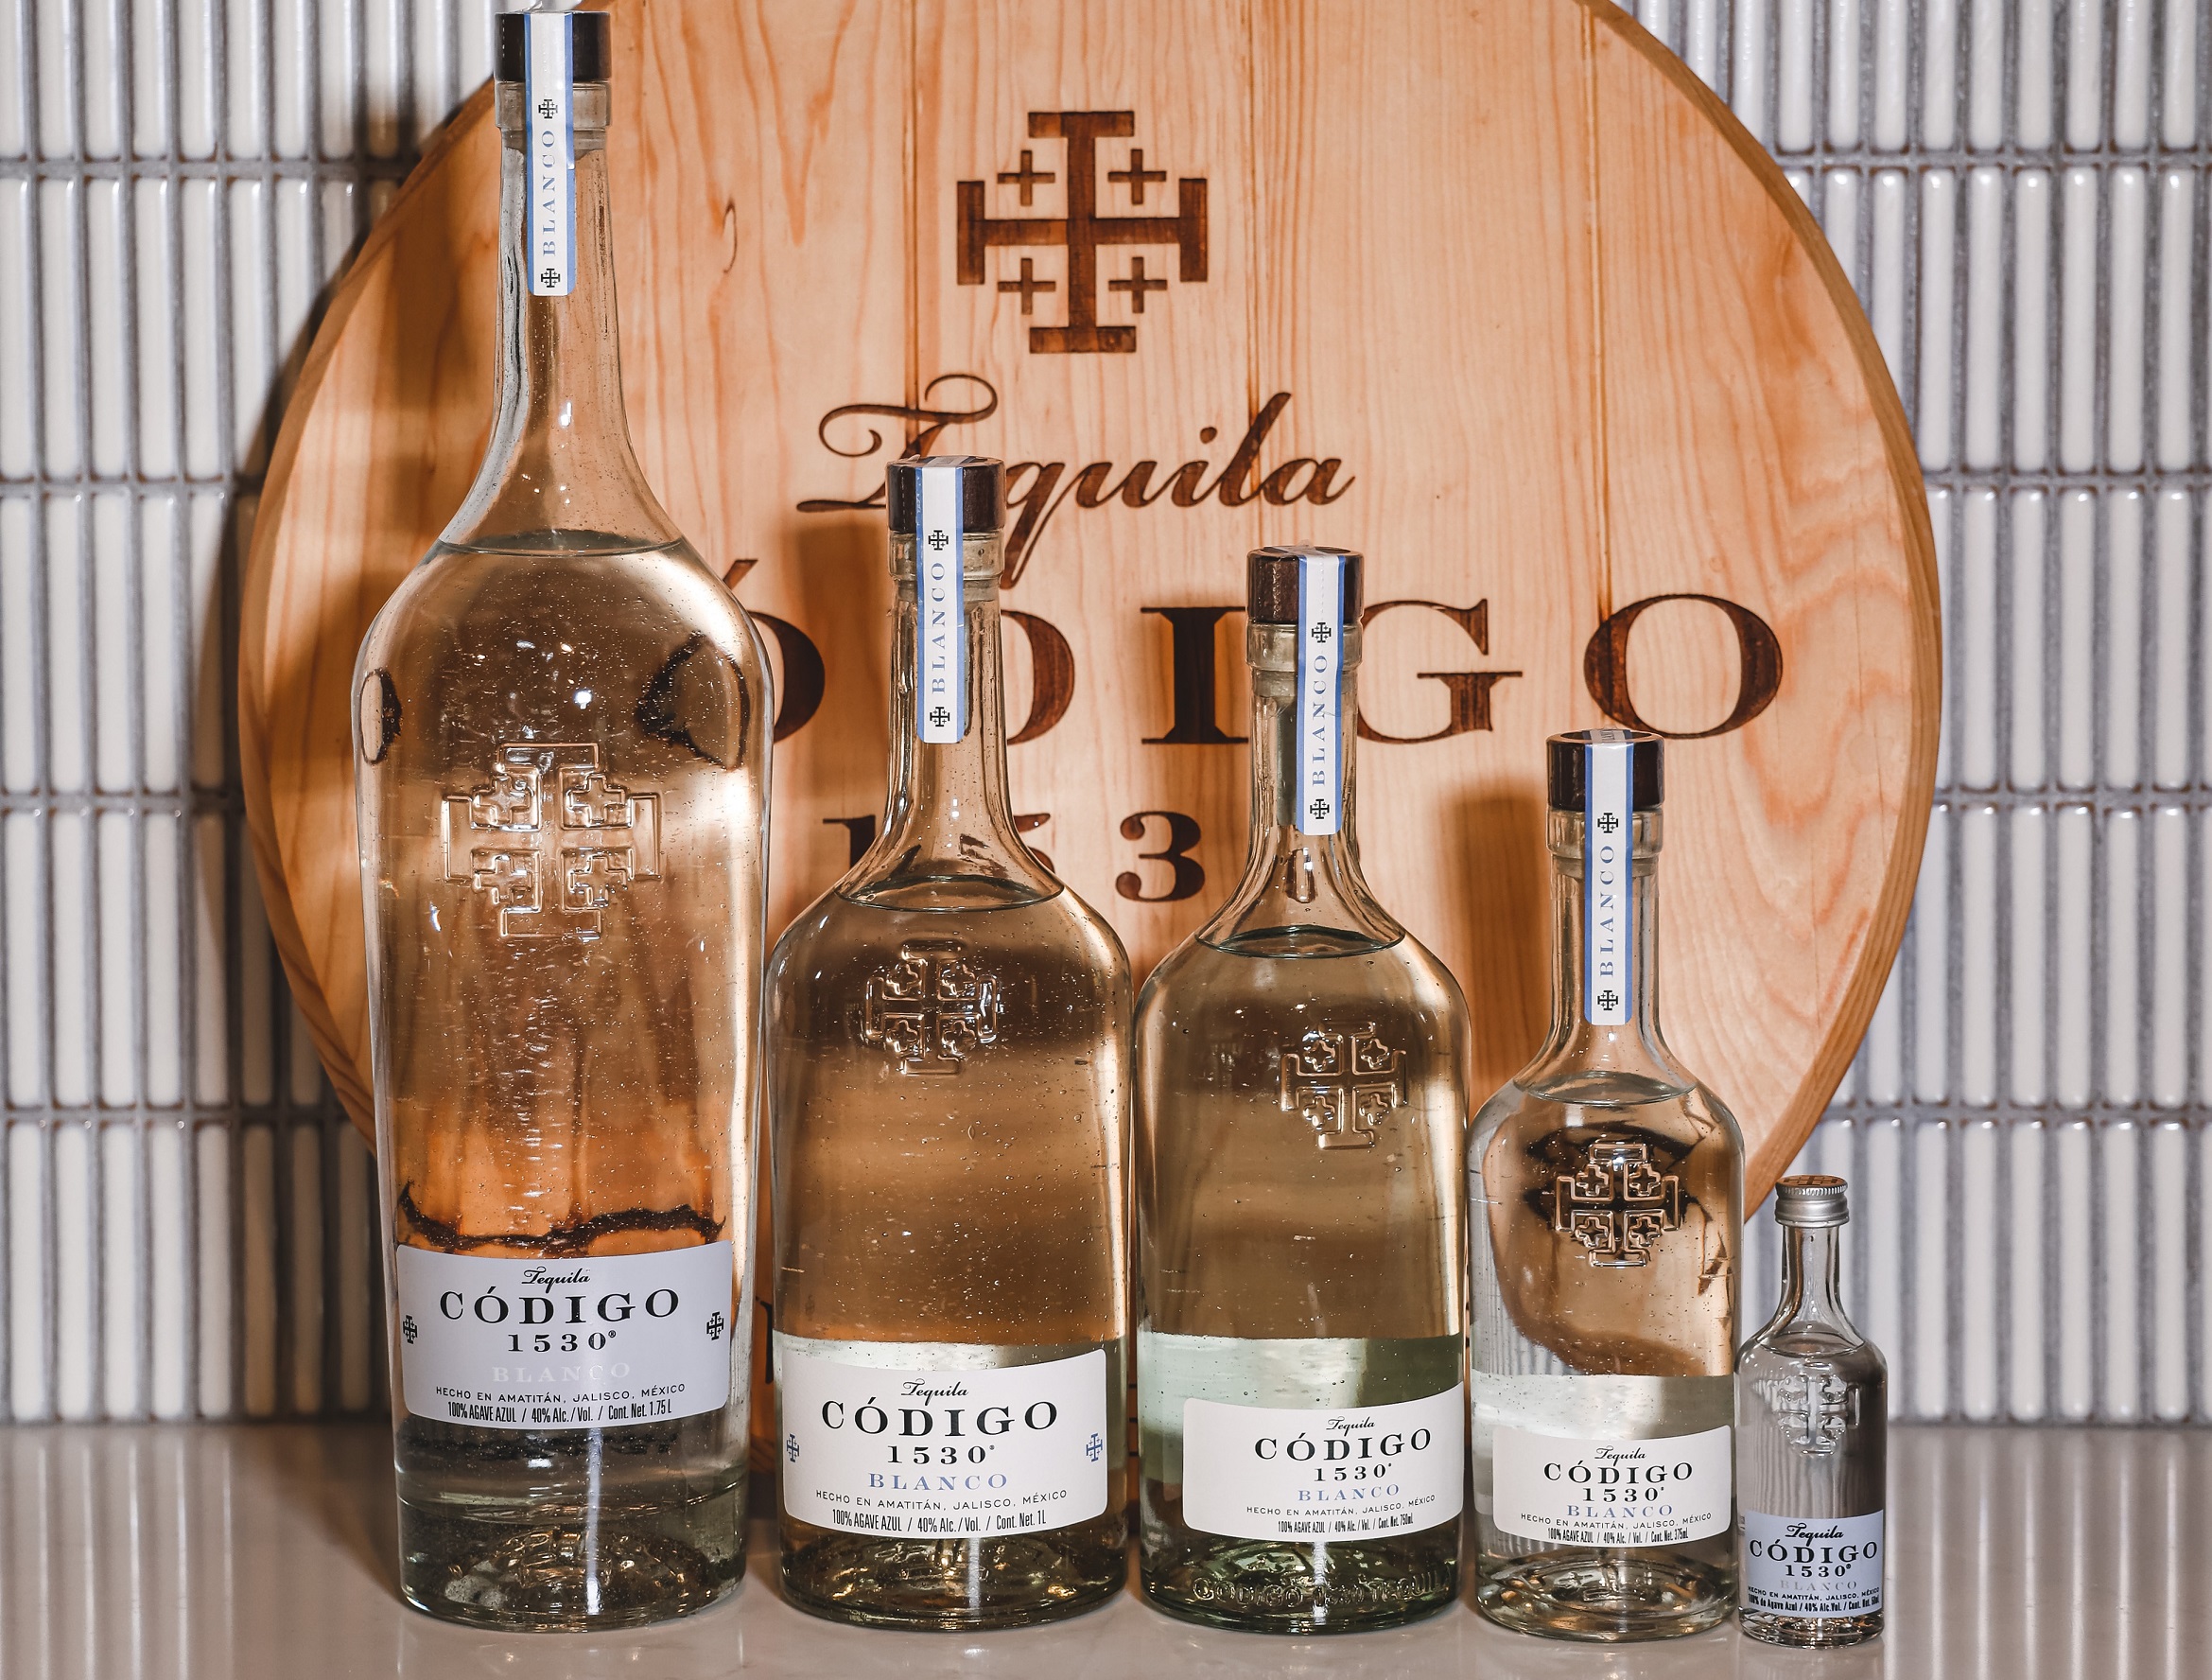 https://www.beveragedaily.com/var/wrbm_gb_food_pharma/storage/images/publications/food-beverage-nutrition/beveragedaily.com/news/manufacturers/pernod-ricard-to-acquire-majority-stake-in-ultra-premium-tequila-co-digo-1530/15860453-2-eng-GB/Pernod-Ricard-to-acquire-majority-stake-in-ultra-premium-tequila-Co-digo-1530.jpg